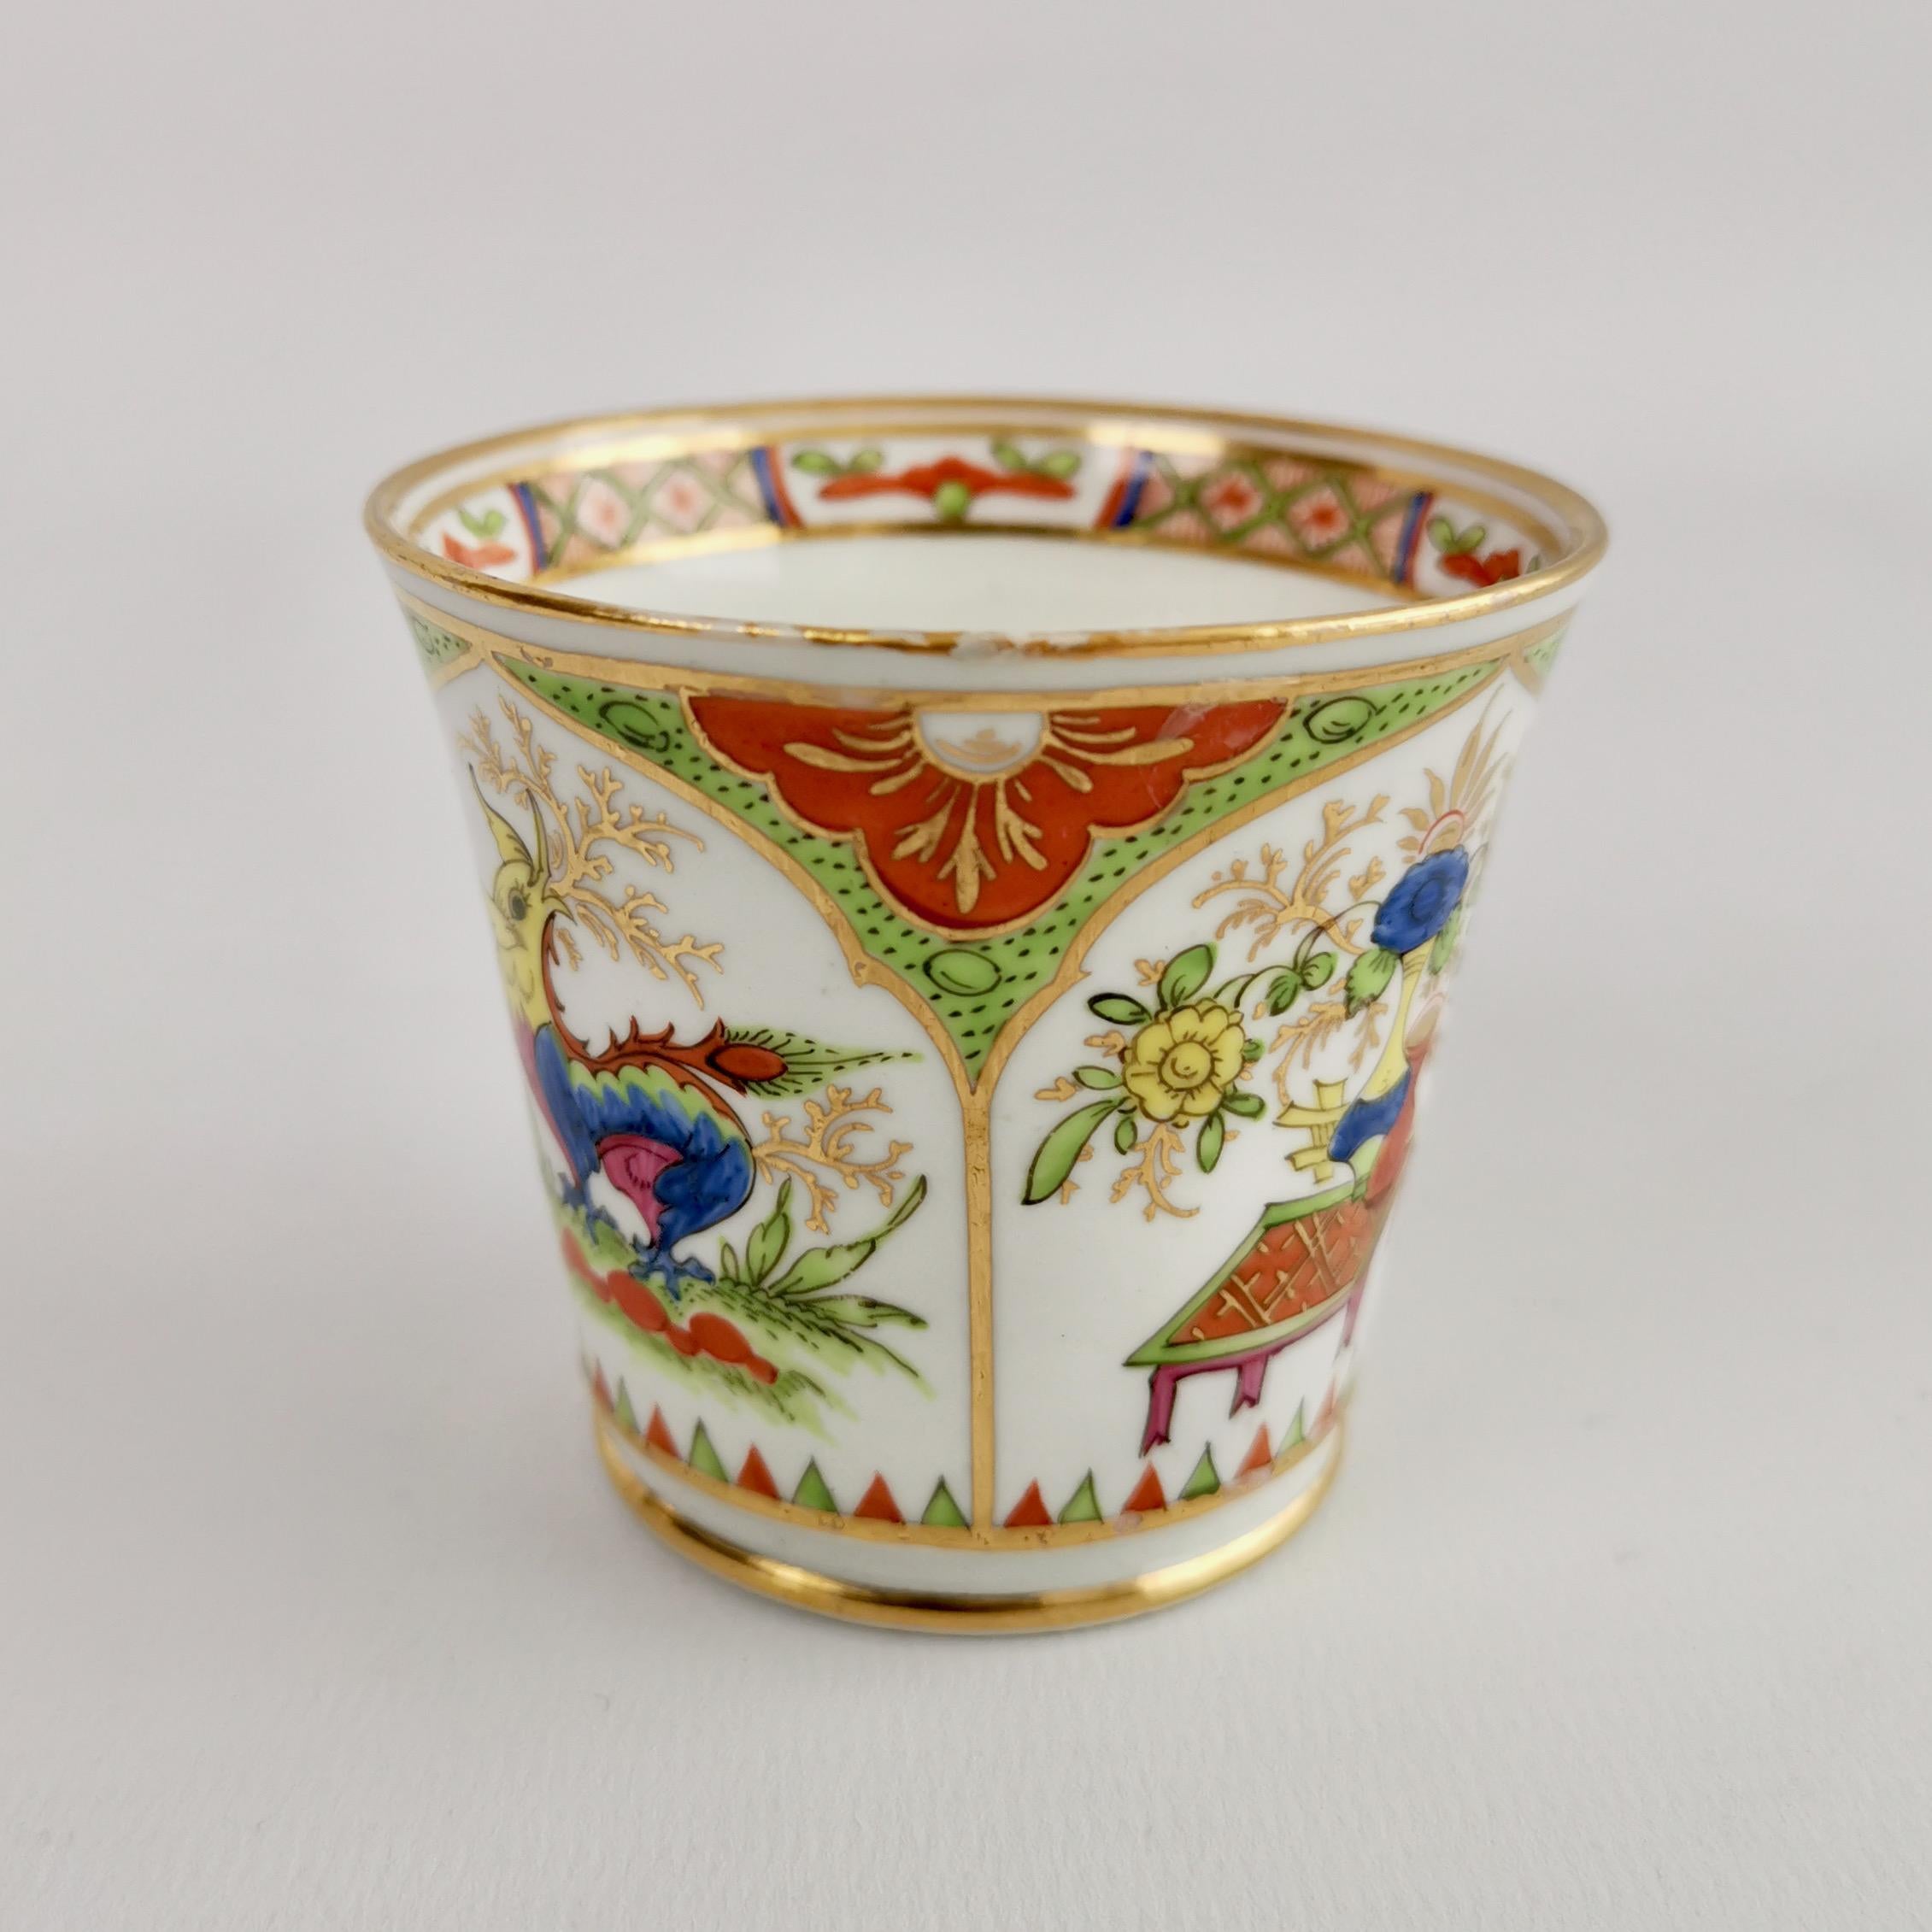 This is a super charming orphaned coffee cup made by Chamberlains in Worcester, circa 1810. The cup is decorated with the famous 